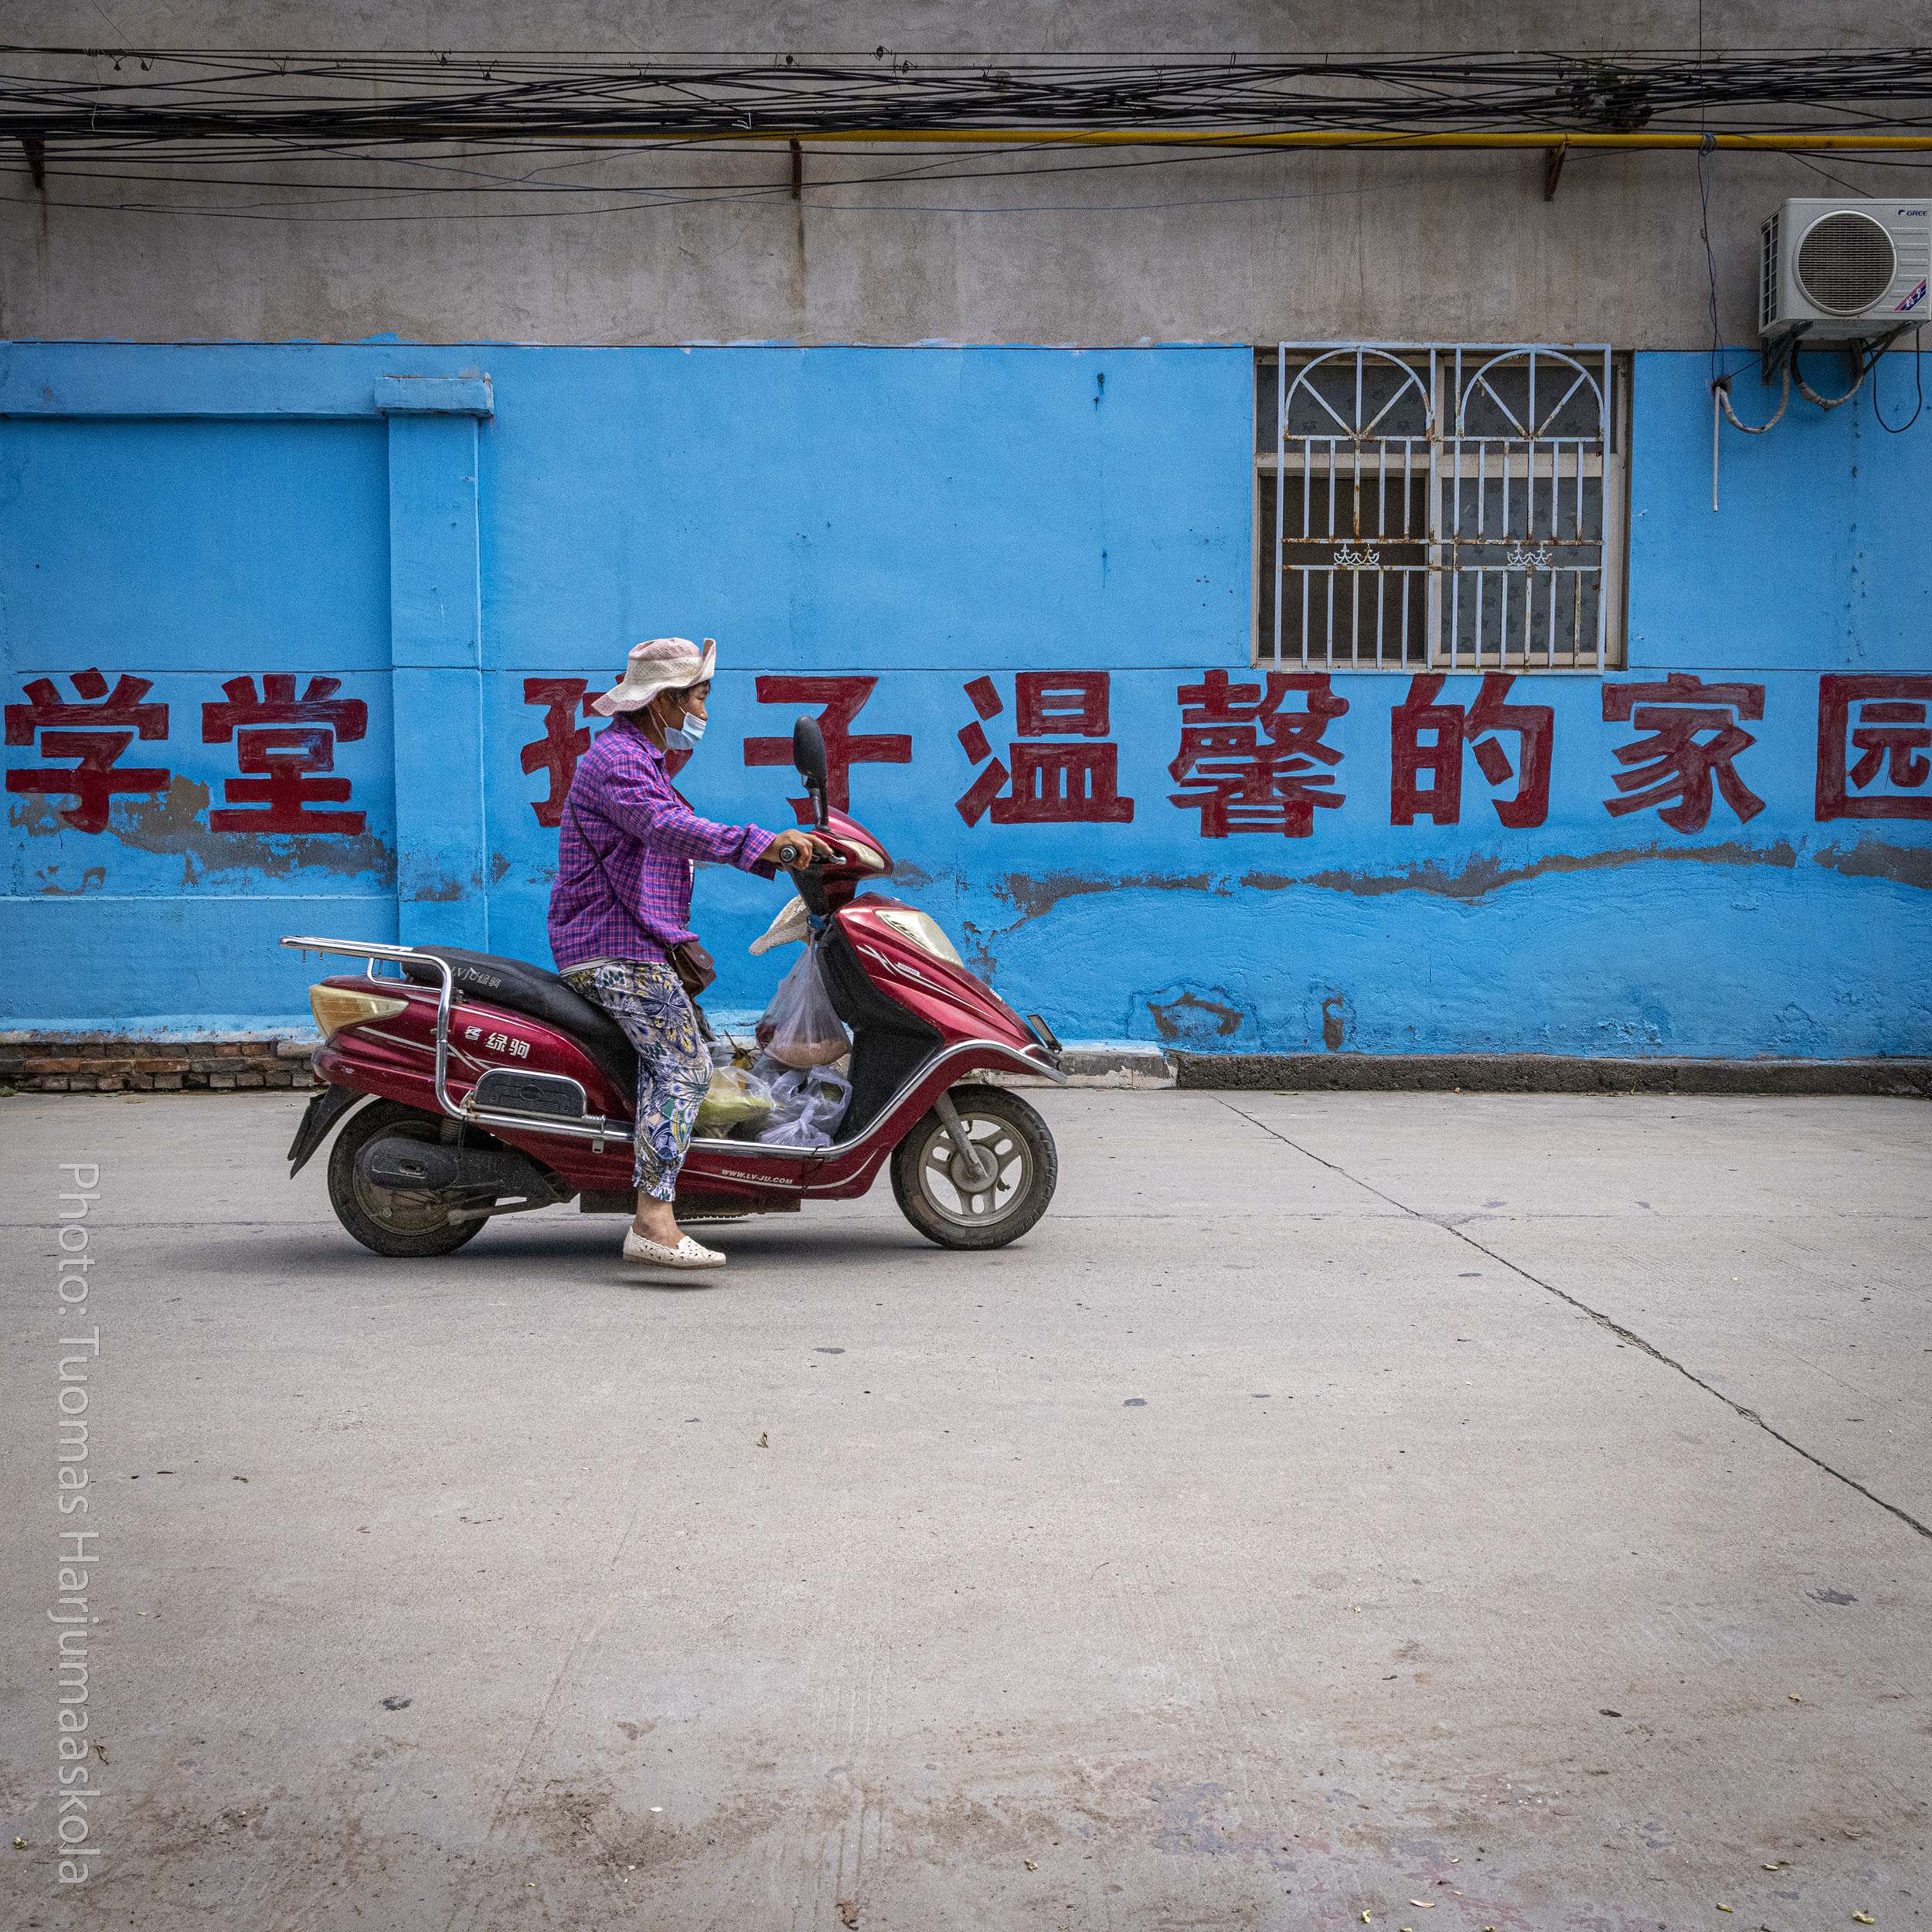 A woman passing by on a scooter, Chinese writing on a blue wall behind her. Photographer by Tuomas Harjumaaskola.